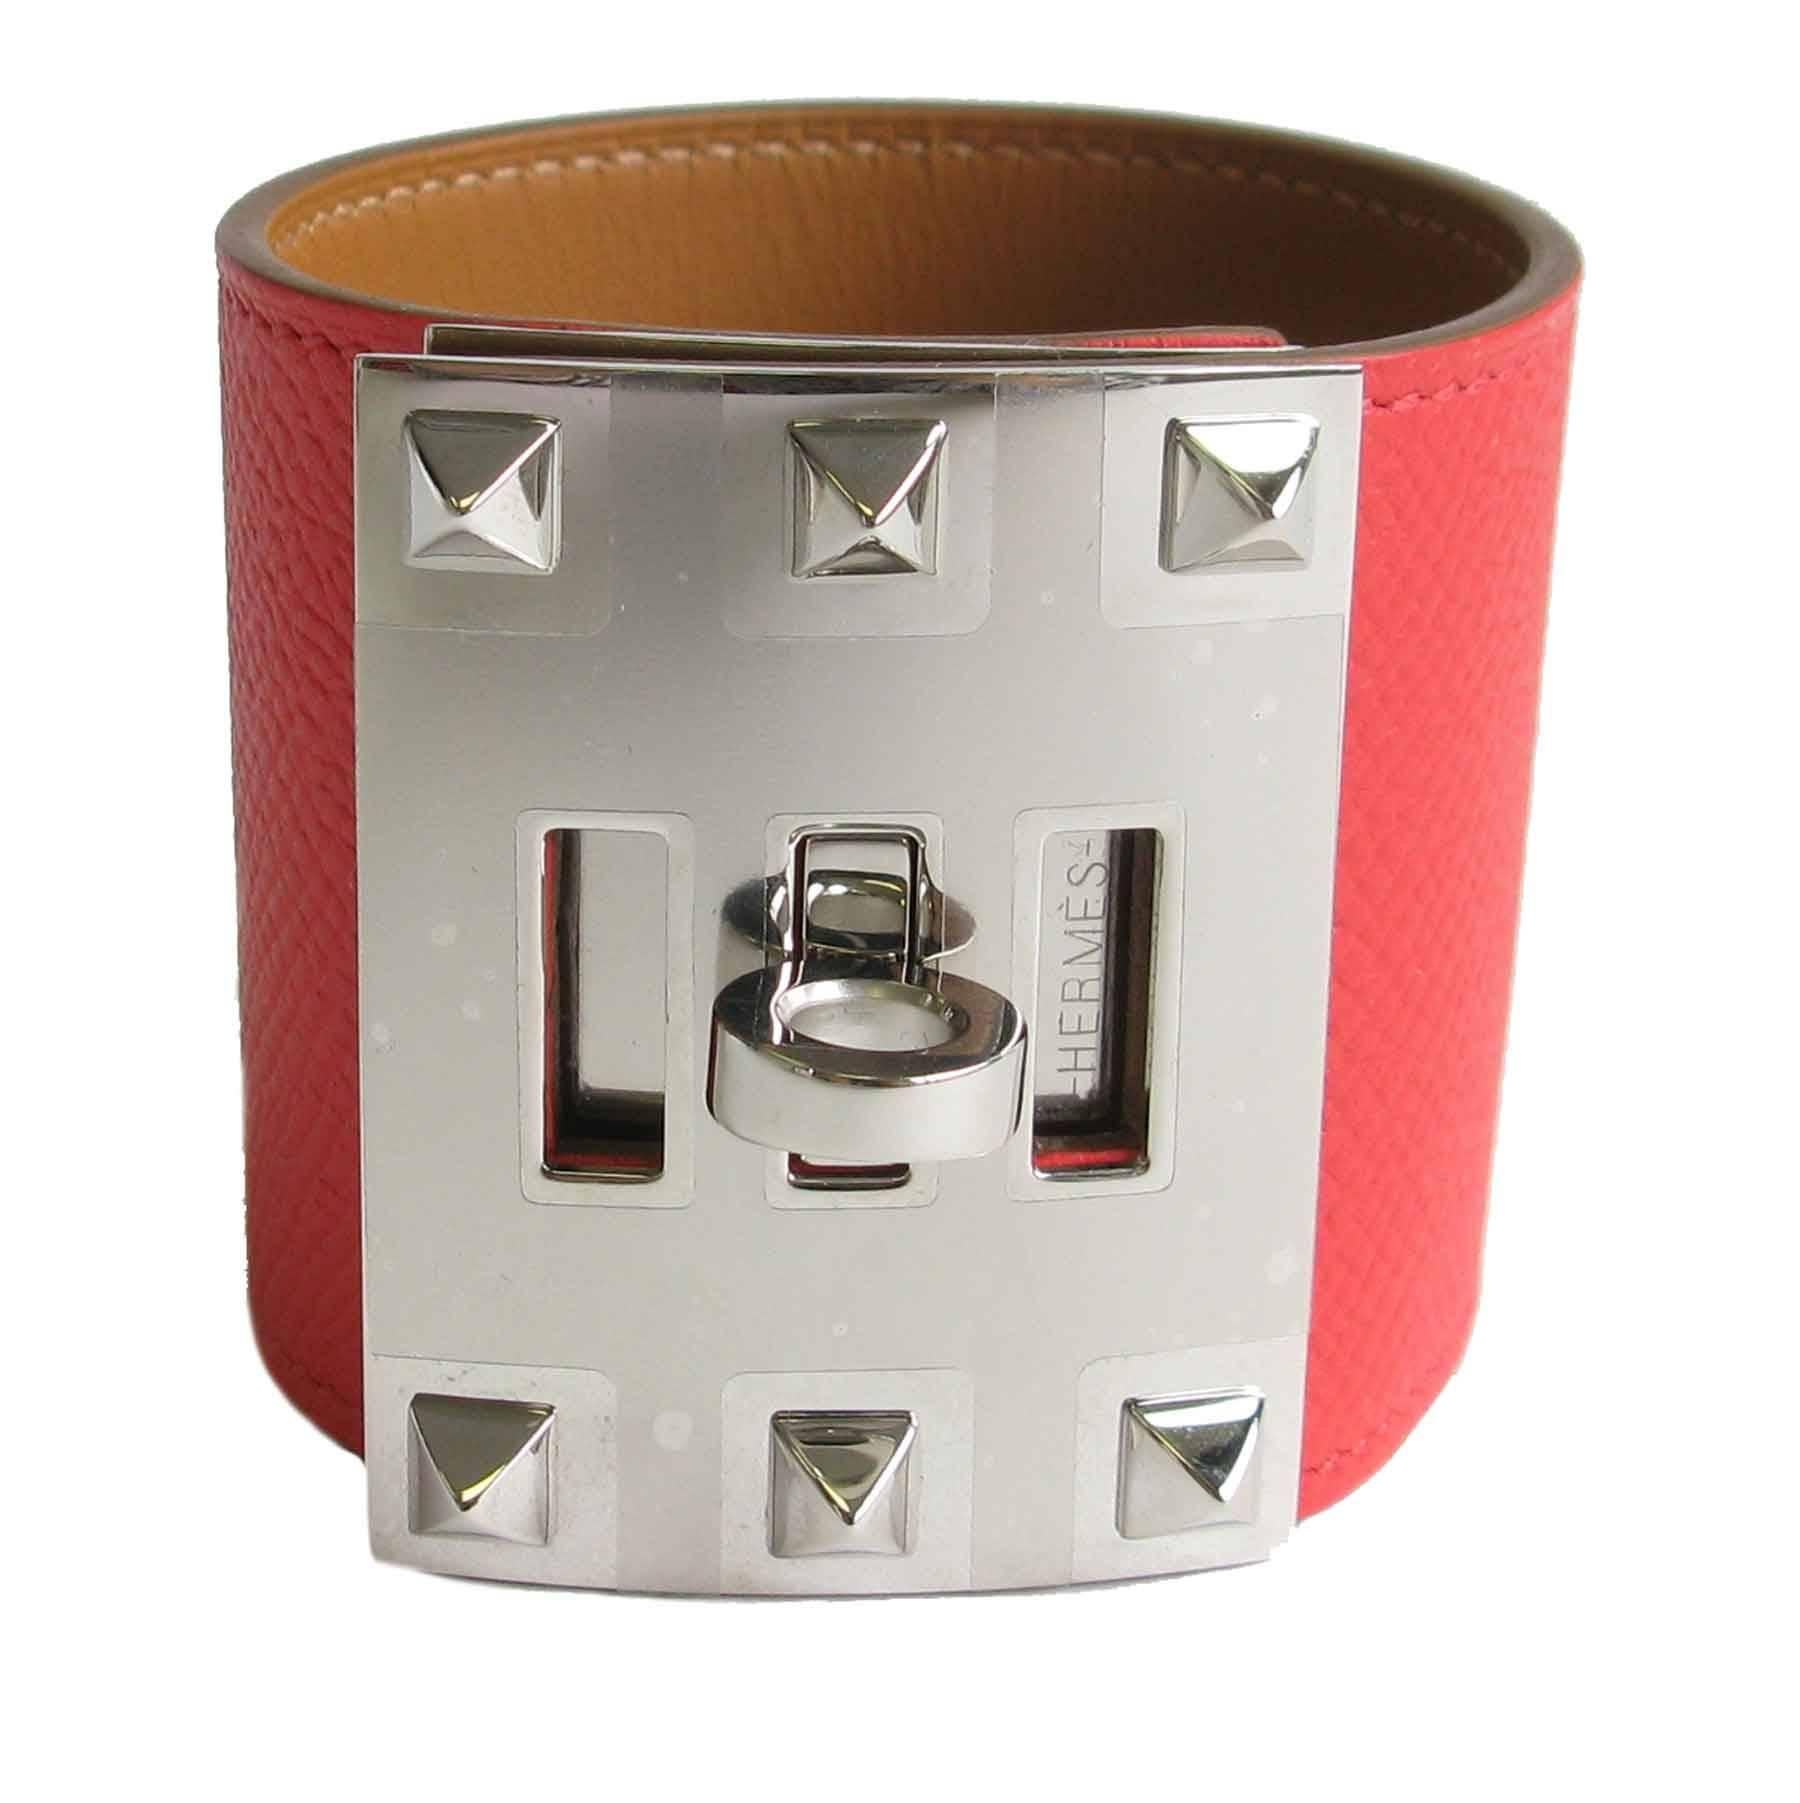 Hermes cuff 'Extreme' in epsom calfskin, color : pink Jaïpur,  palladium plated hardware.

Letter T (year 2015), S of private sales. Size S

Dimensions : length from 17 to 19 cm

Delivered in a pochon Valois Vintage Paris